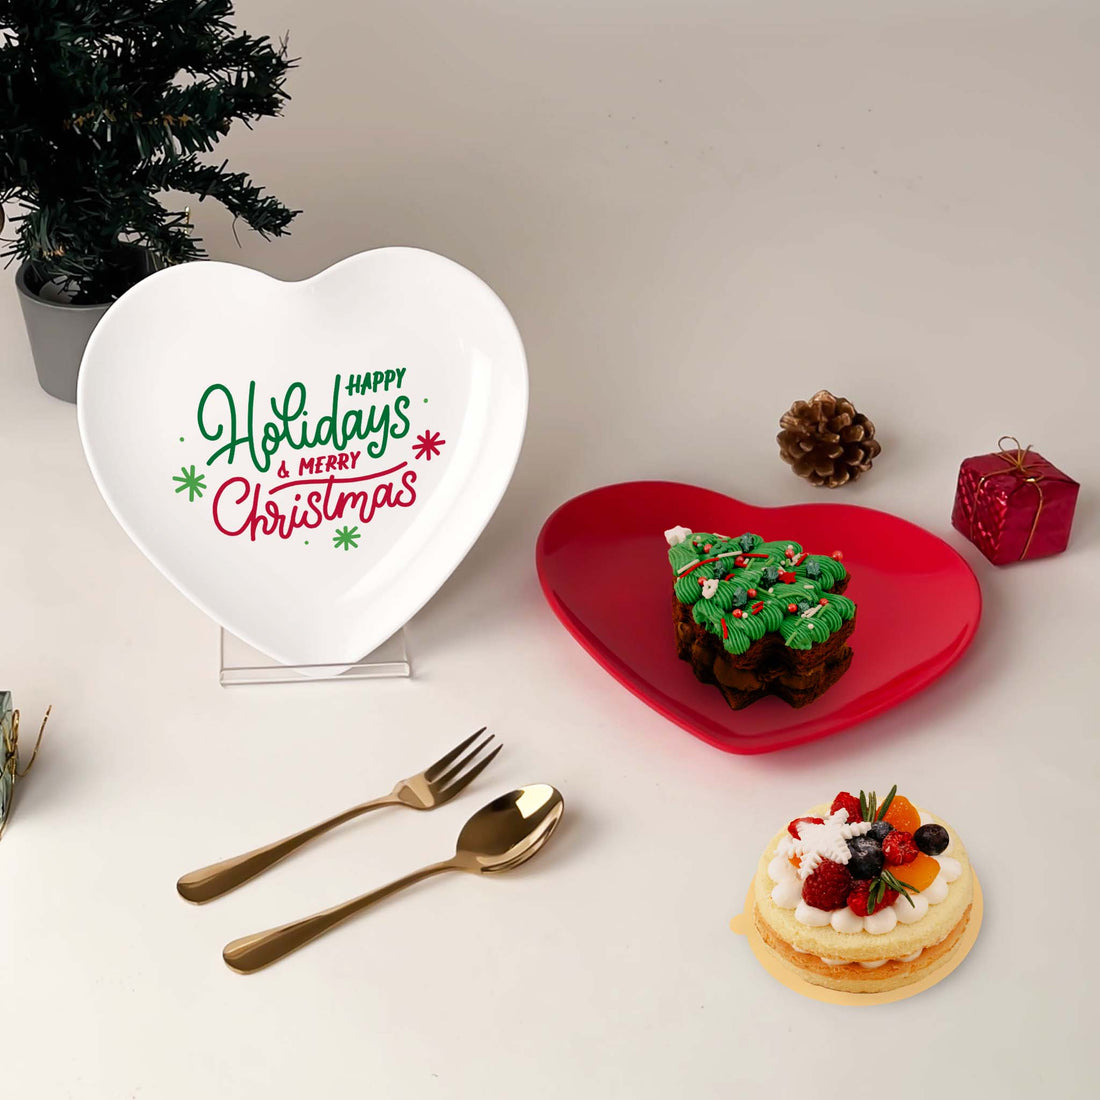 A Holiday Collaboration You'll Want To Shop: The Plate Story x Sweetest Moment